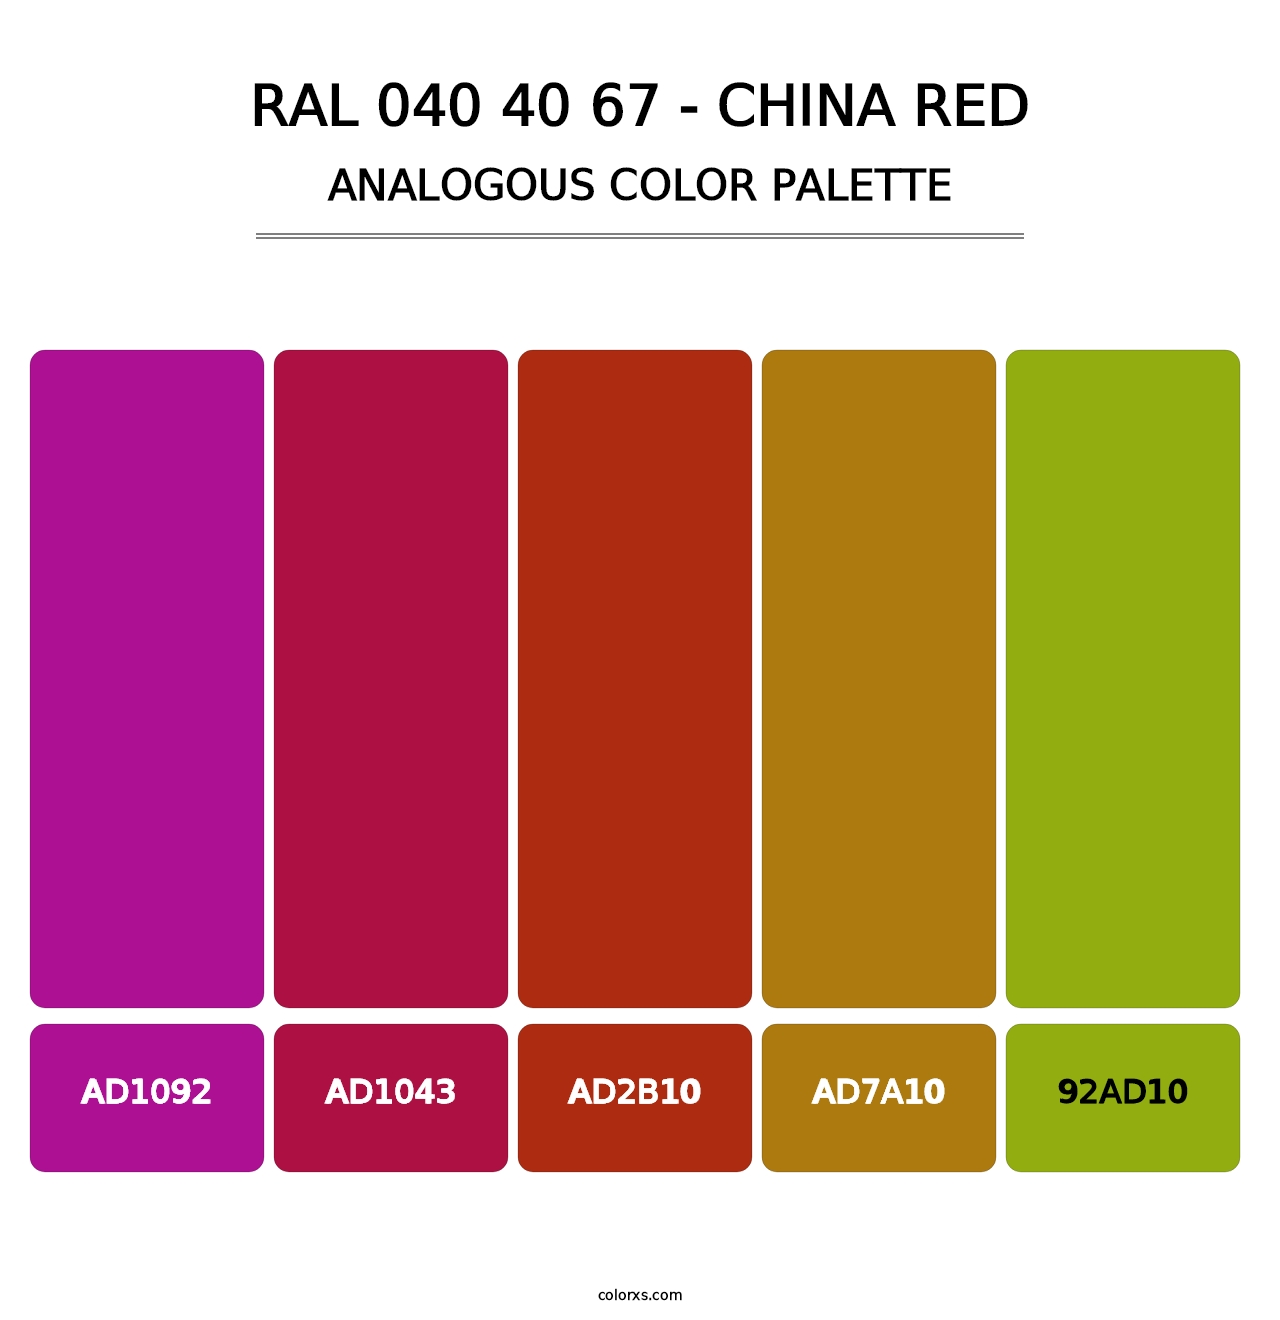 RAL 040 40 67 - China Red - Analogous Color Palette